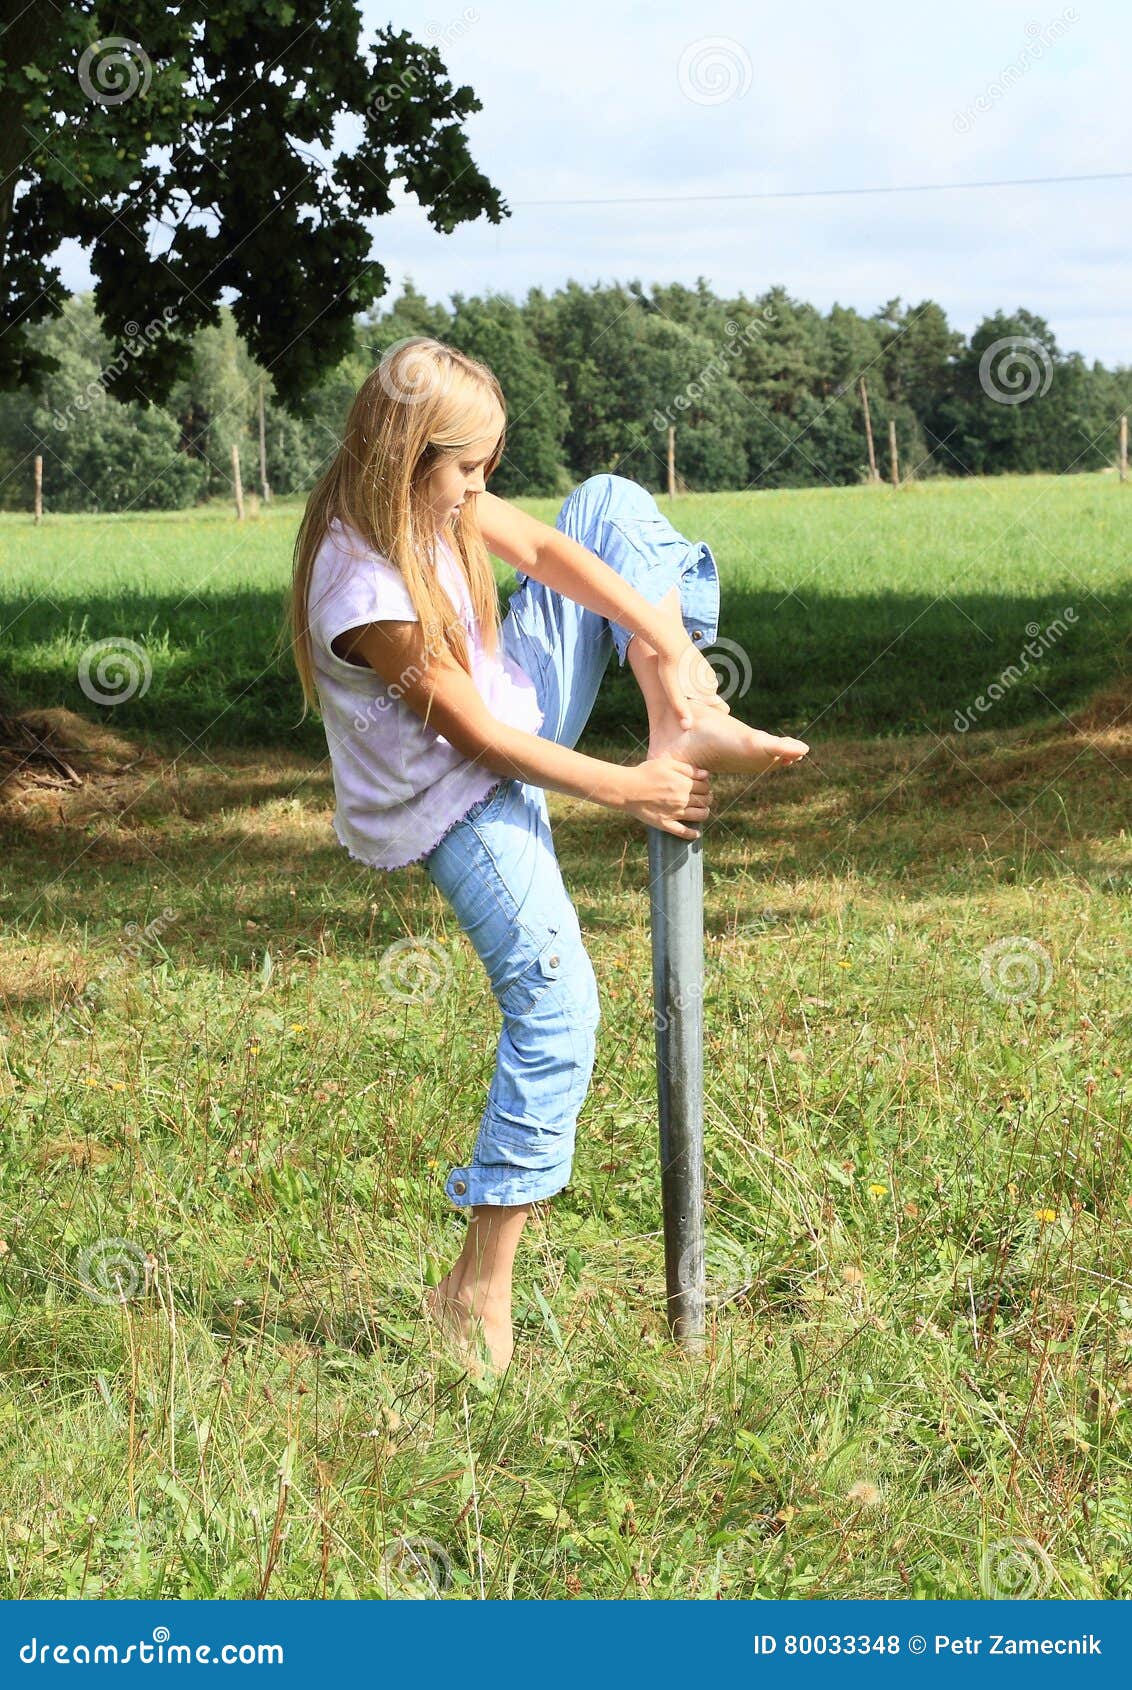 https://thumbs.dreamstime.com/z/girl-stepping-iron-pillar-barefoot-kid-young-smiling-blond-metal-meadow-to-keep-balance-80033348.jpg